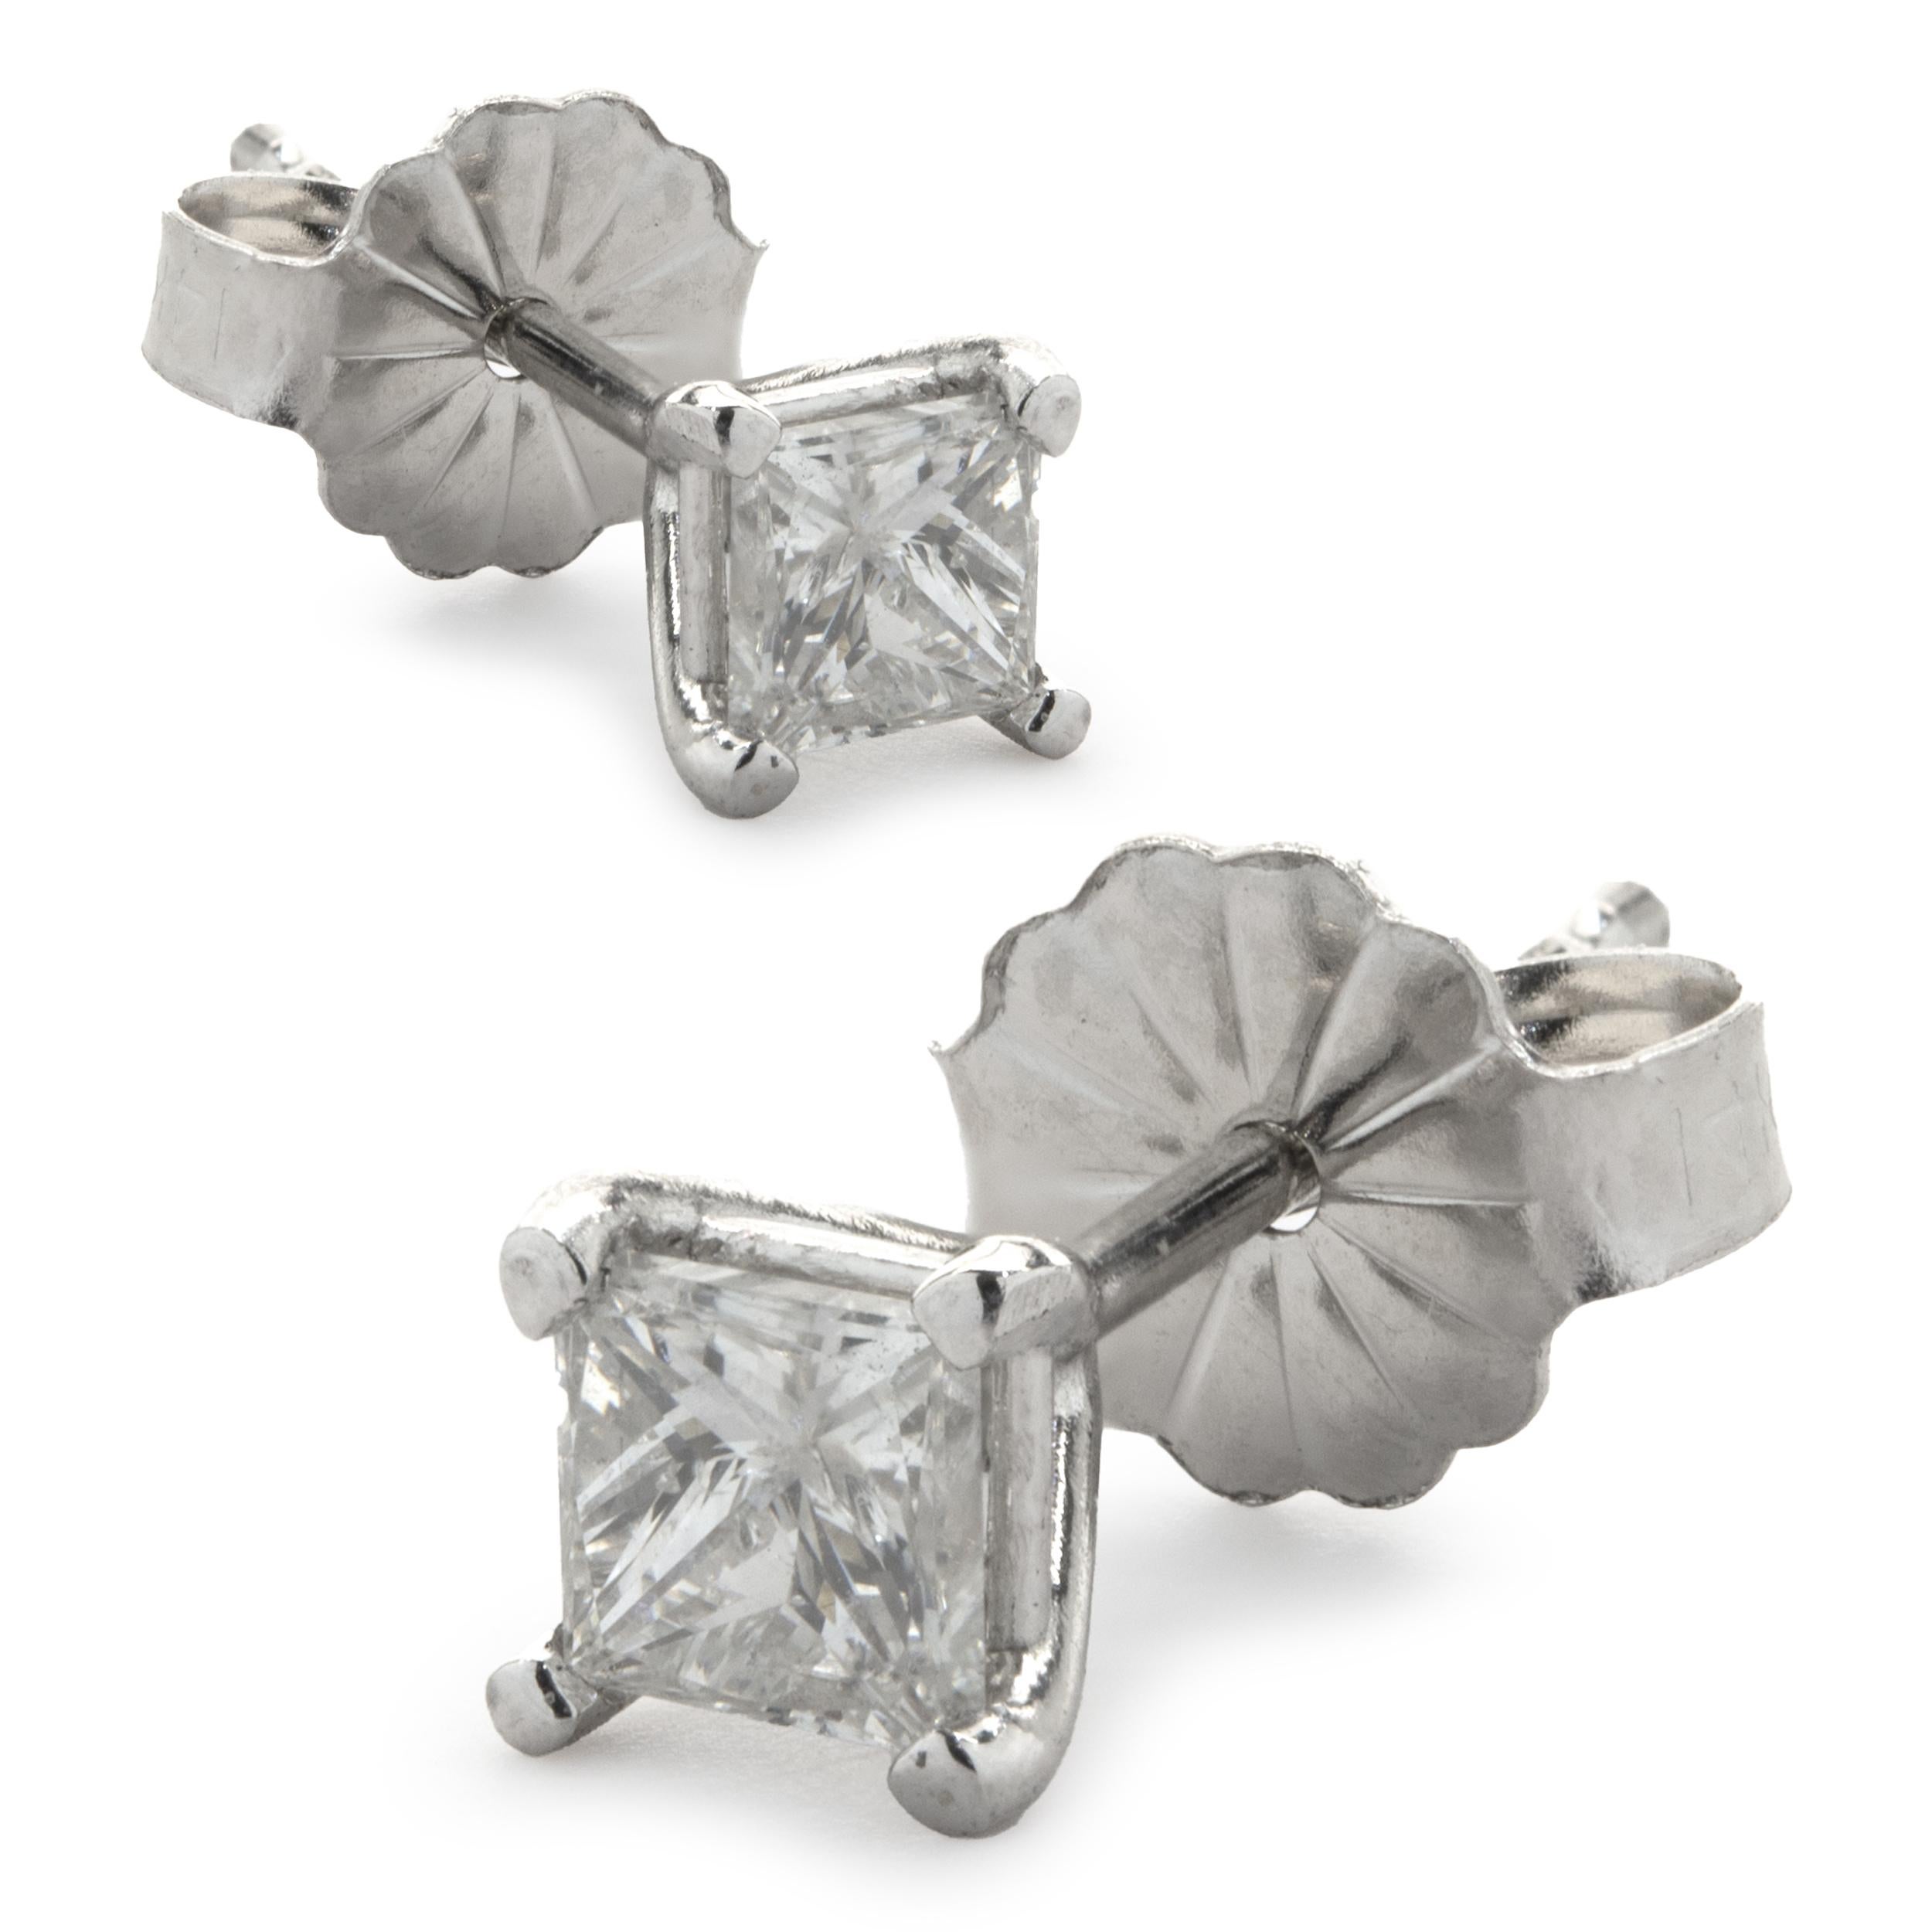 14 Karat White Gold Princess Cut Diamond Stud Earrings In Excellent Condition For Sale In Scottsdale, AZ